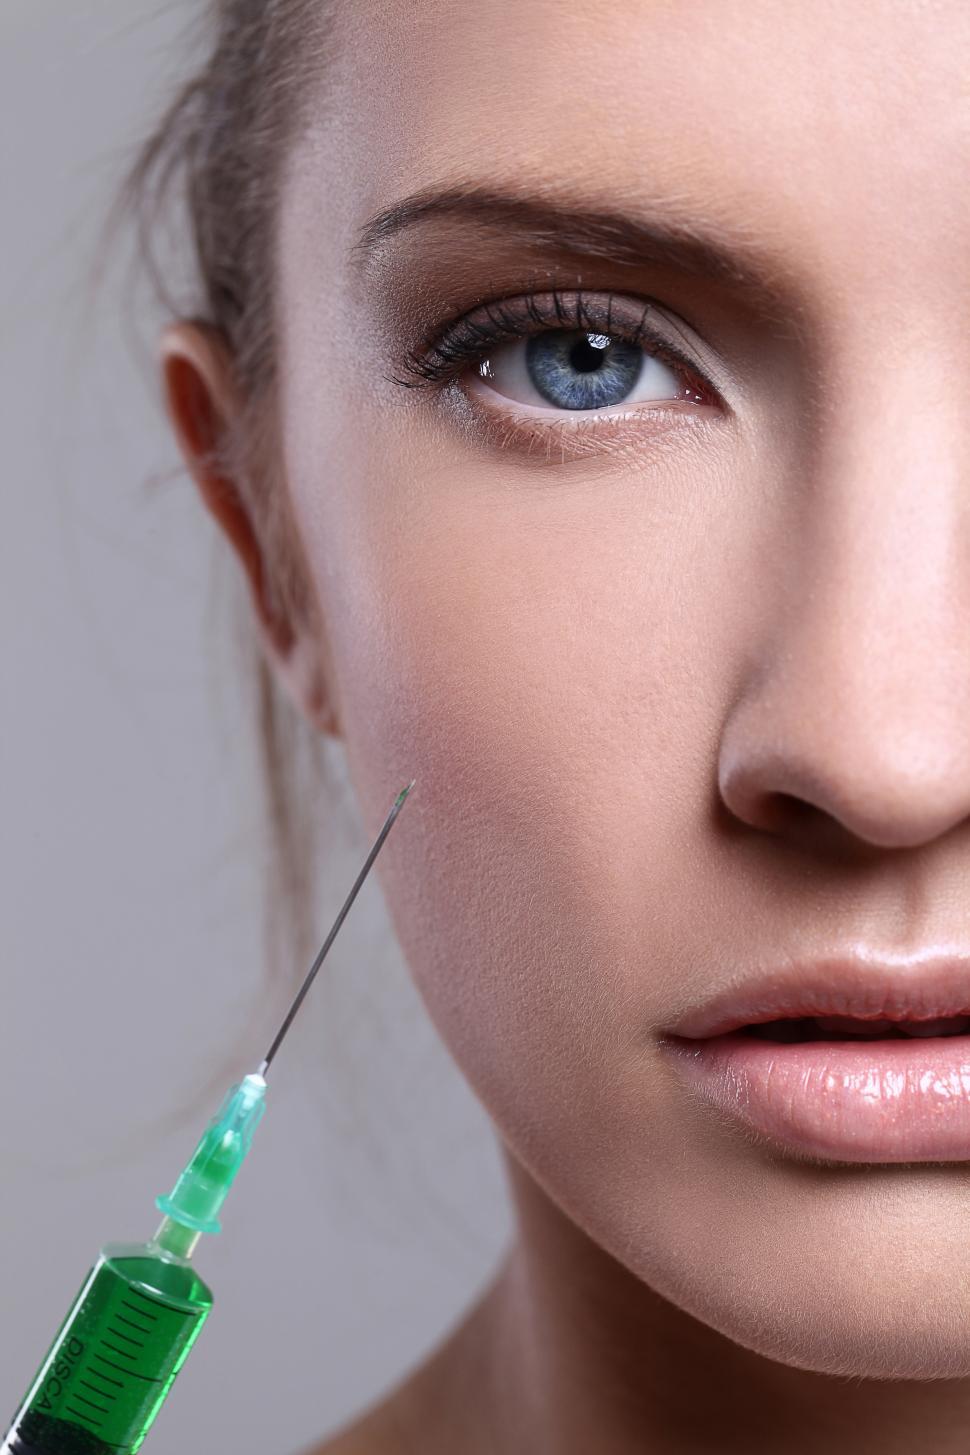 Free Image of A syringe and a female face - cosmetic procedure 